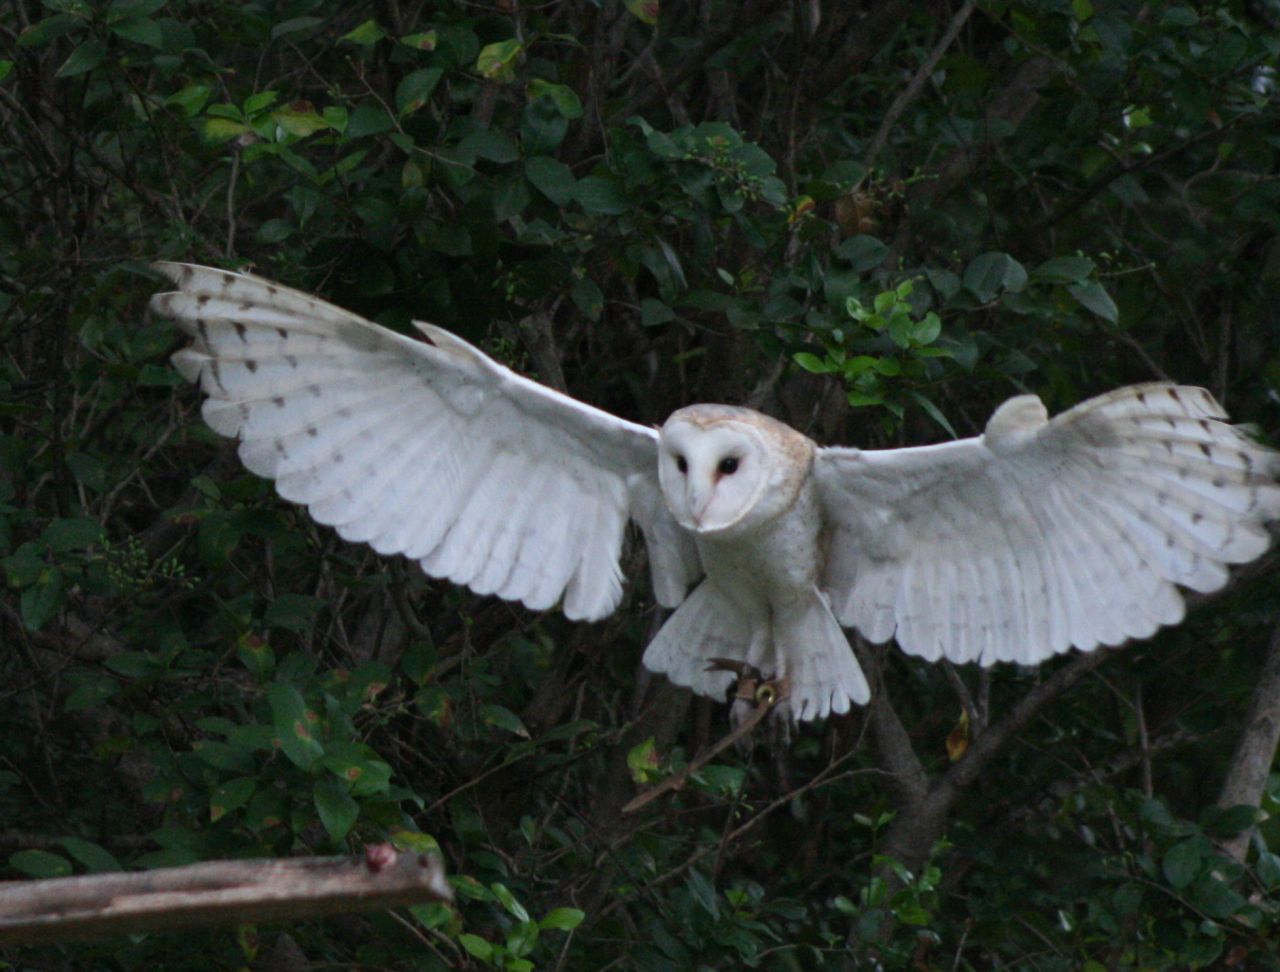 In folklore and myths, the symbolism of an owl is one of "wisdom, helpfulness, and prophecy." Hedwig in 'Harry Potter', is a great example! It's not a stretch then to imagine that the Barn Owl's ghostly appearance, blood-curdling shriek and stealth silence during flight adds further to its mystical and otherworldly traits.